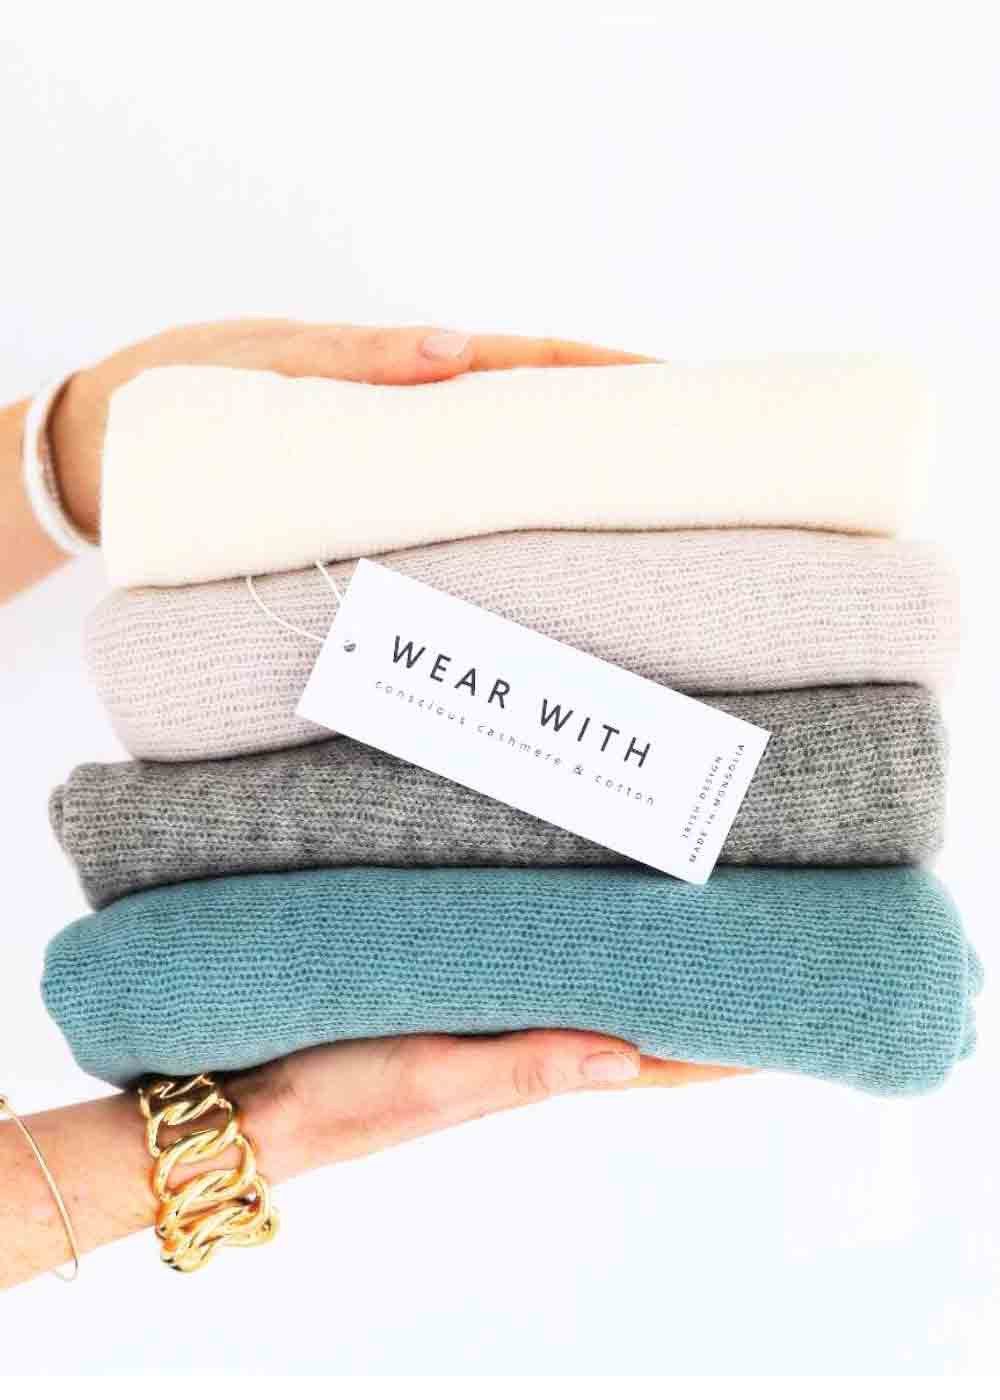 Cashmere Wraps and Scarves from Ireland